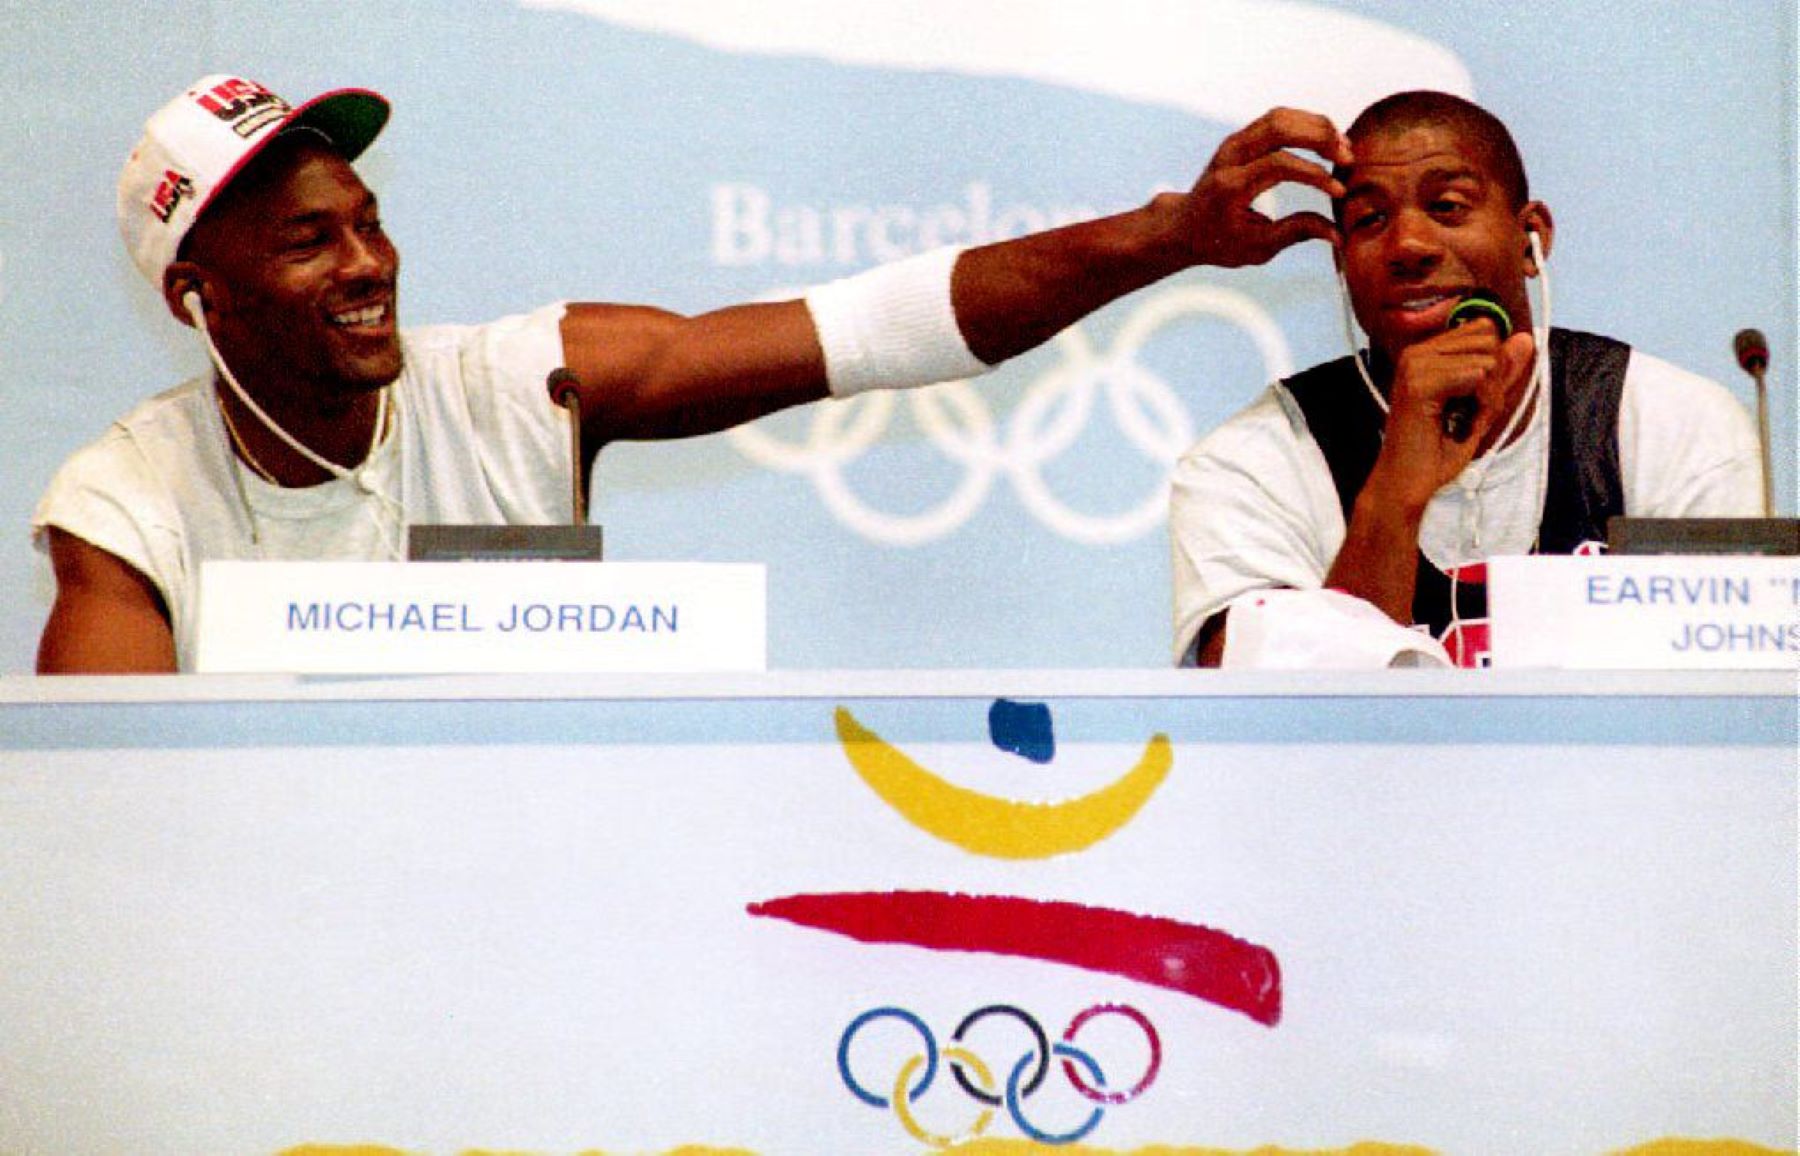 Michael Jordan and Magic Johnson during a press conference for the U.S. Olympic 'Dream Team'